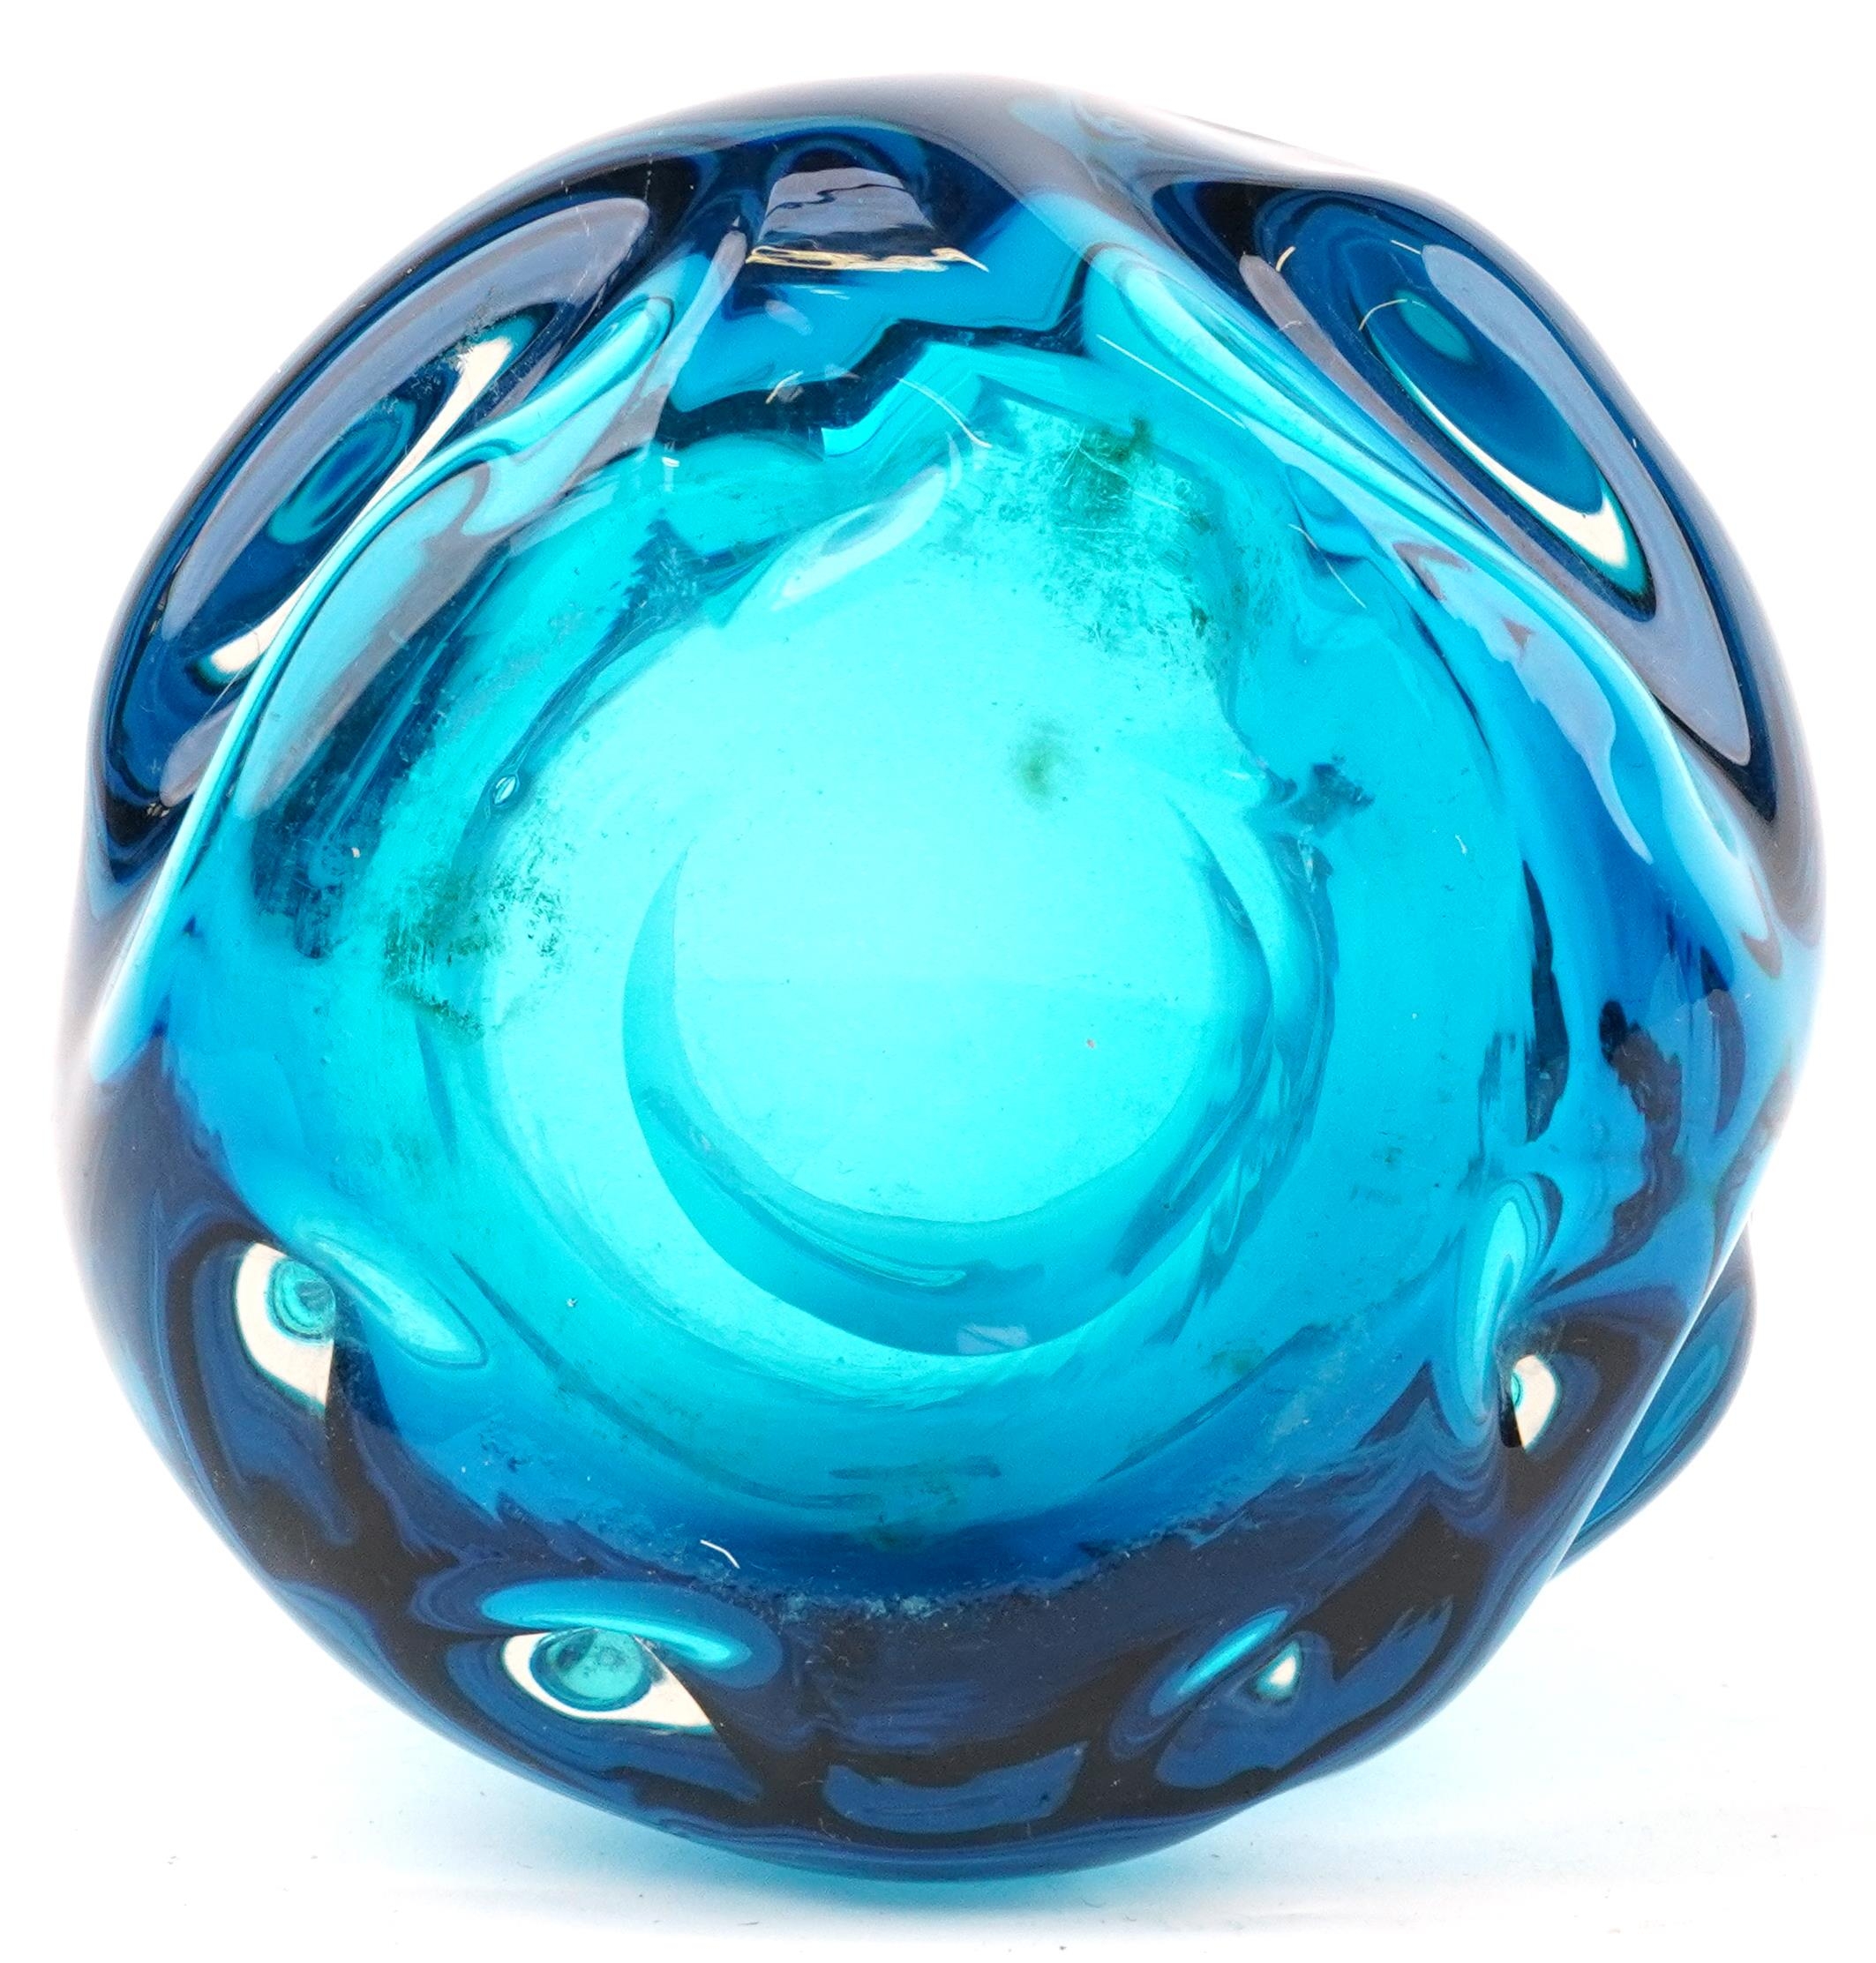 Geoffrey Baxter for Whitefriars, knobbly glass vase in kingfisher blue, 22.5cm high - Image 4 of 4